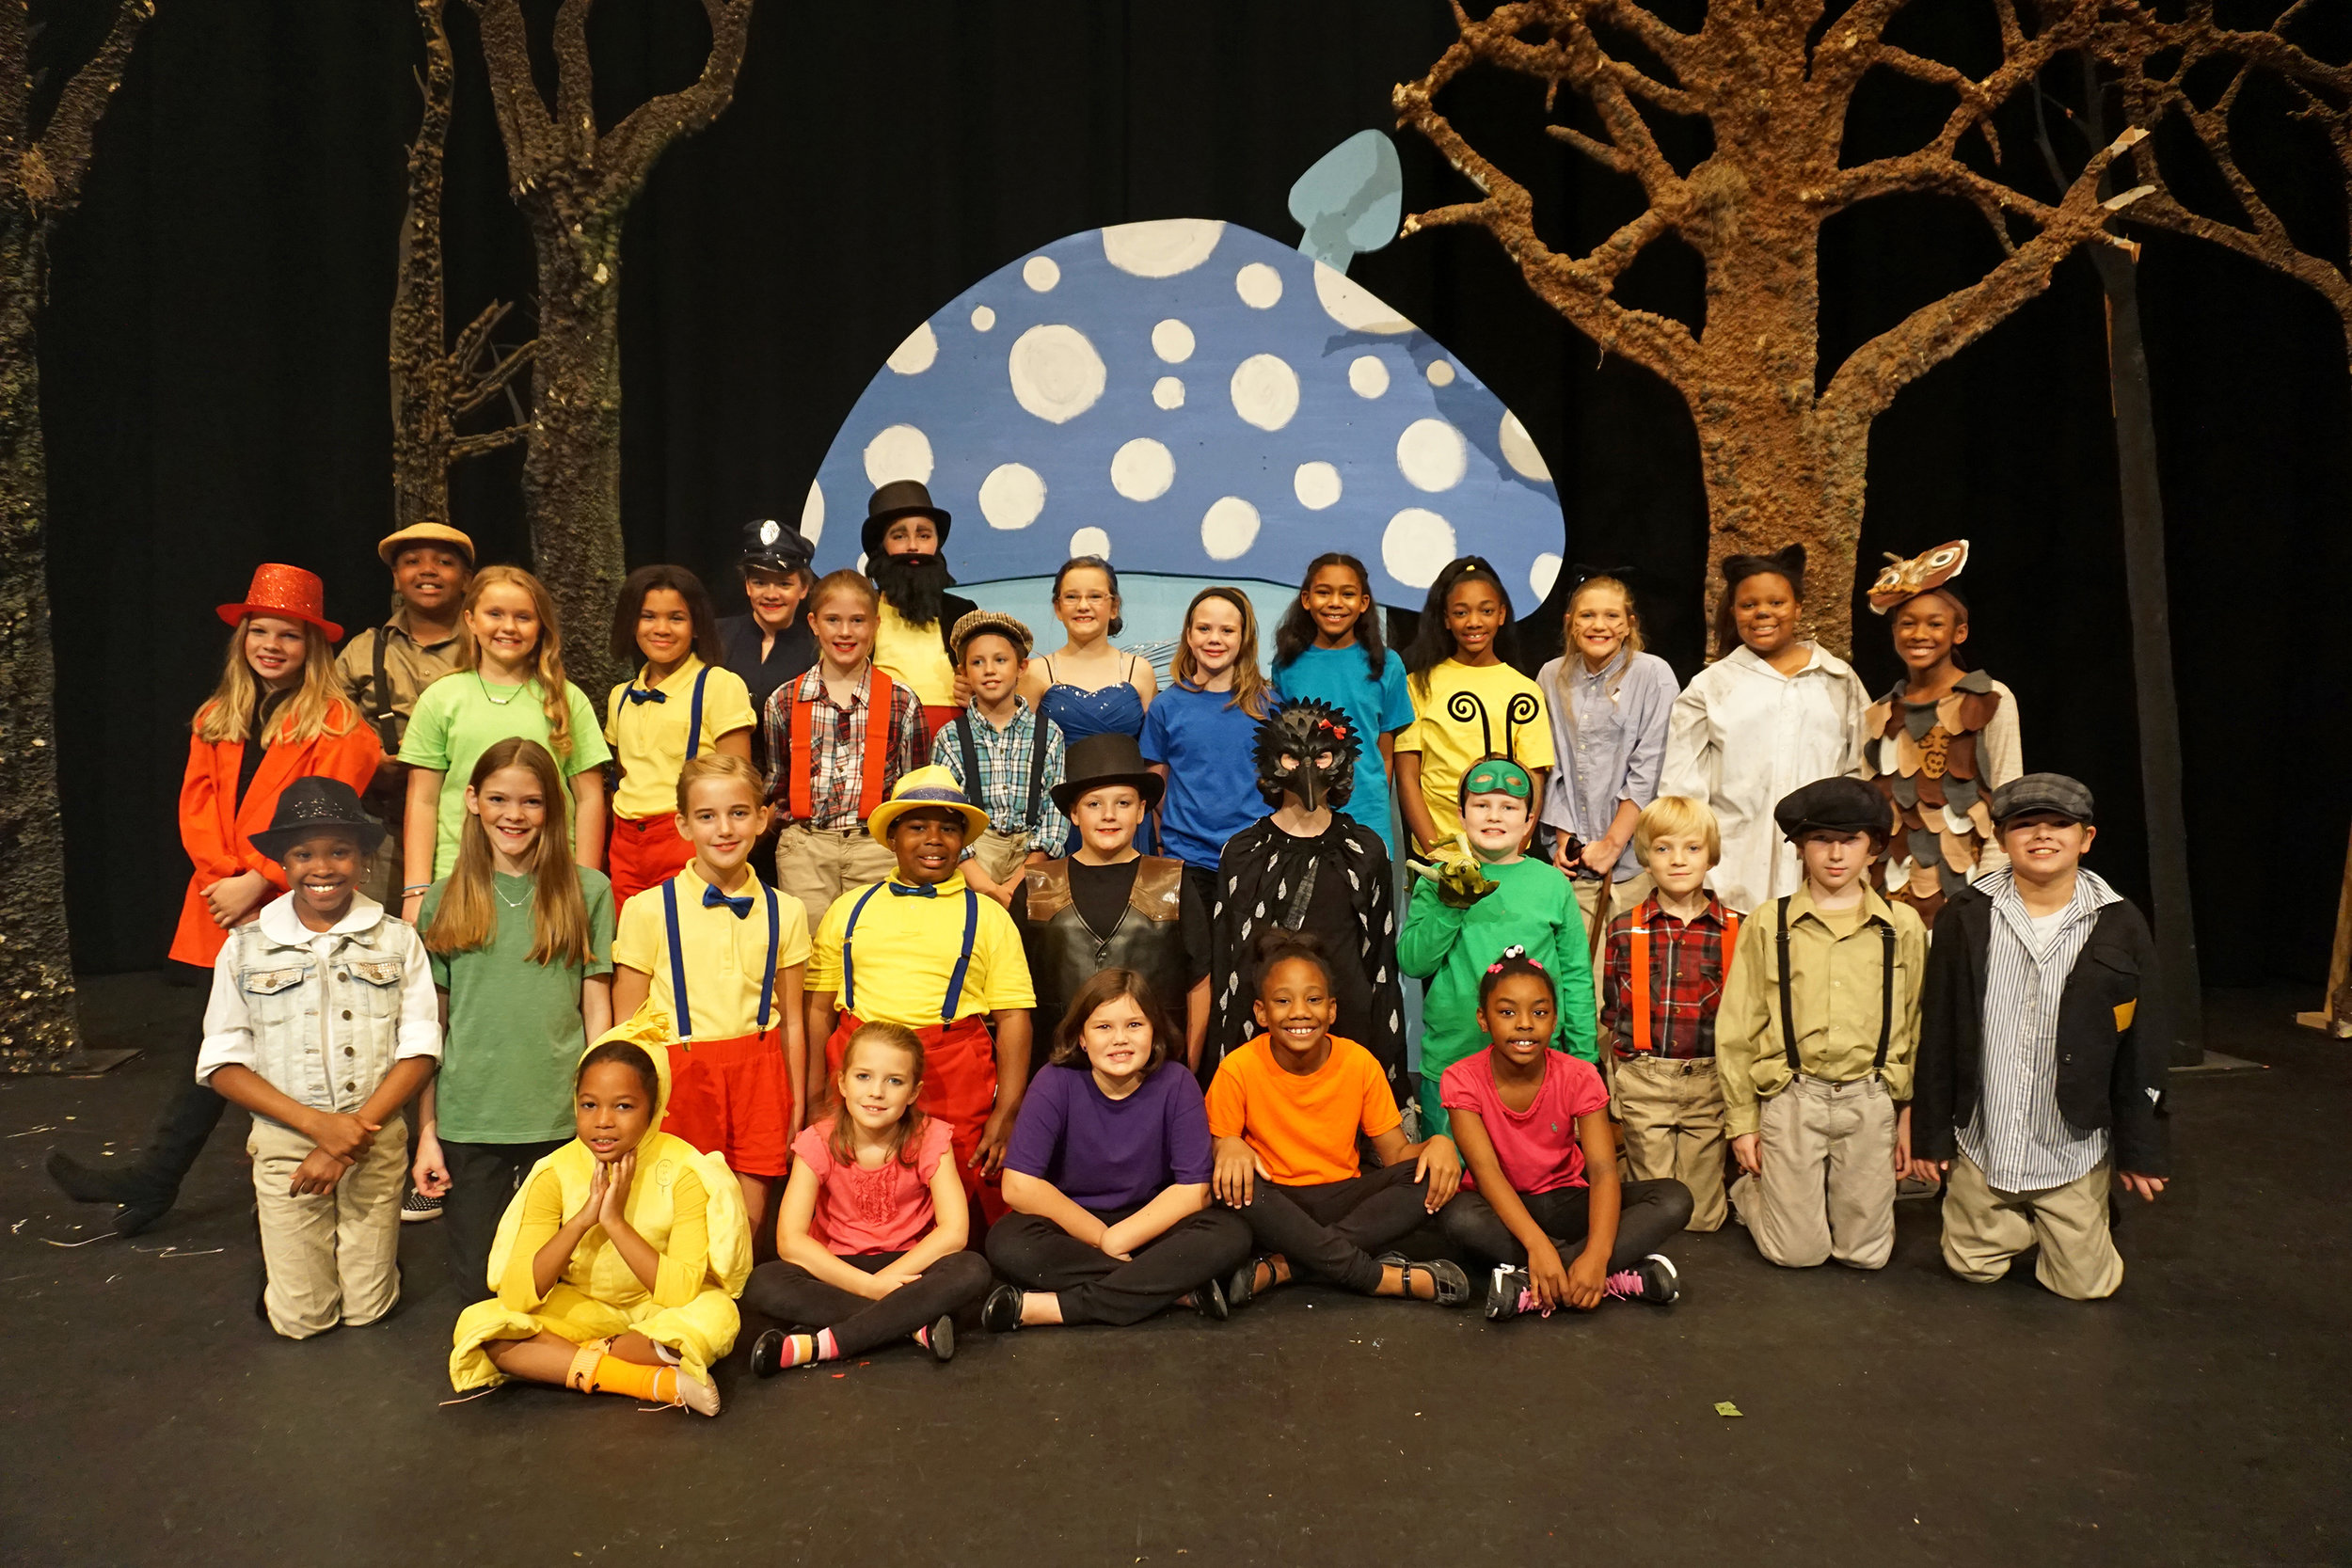 The cast of The Adventures of Pinocchio